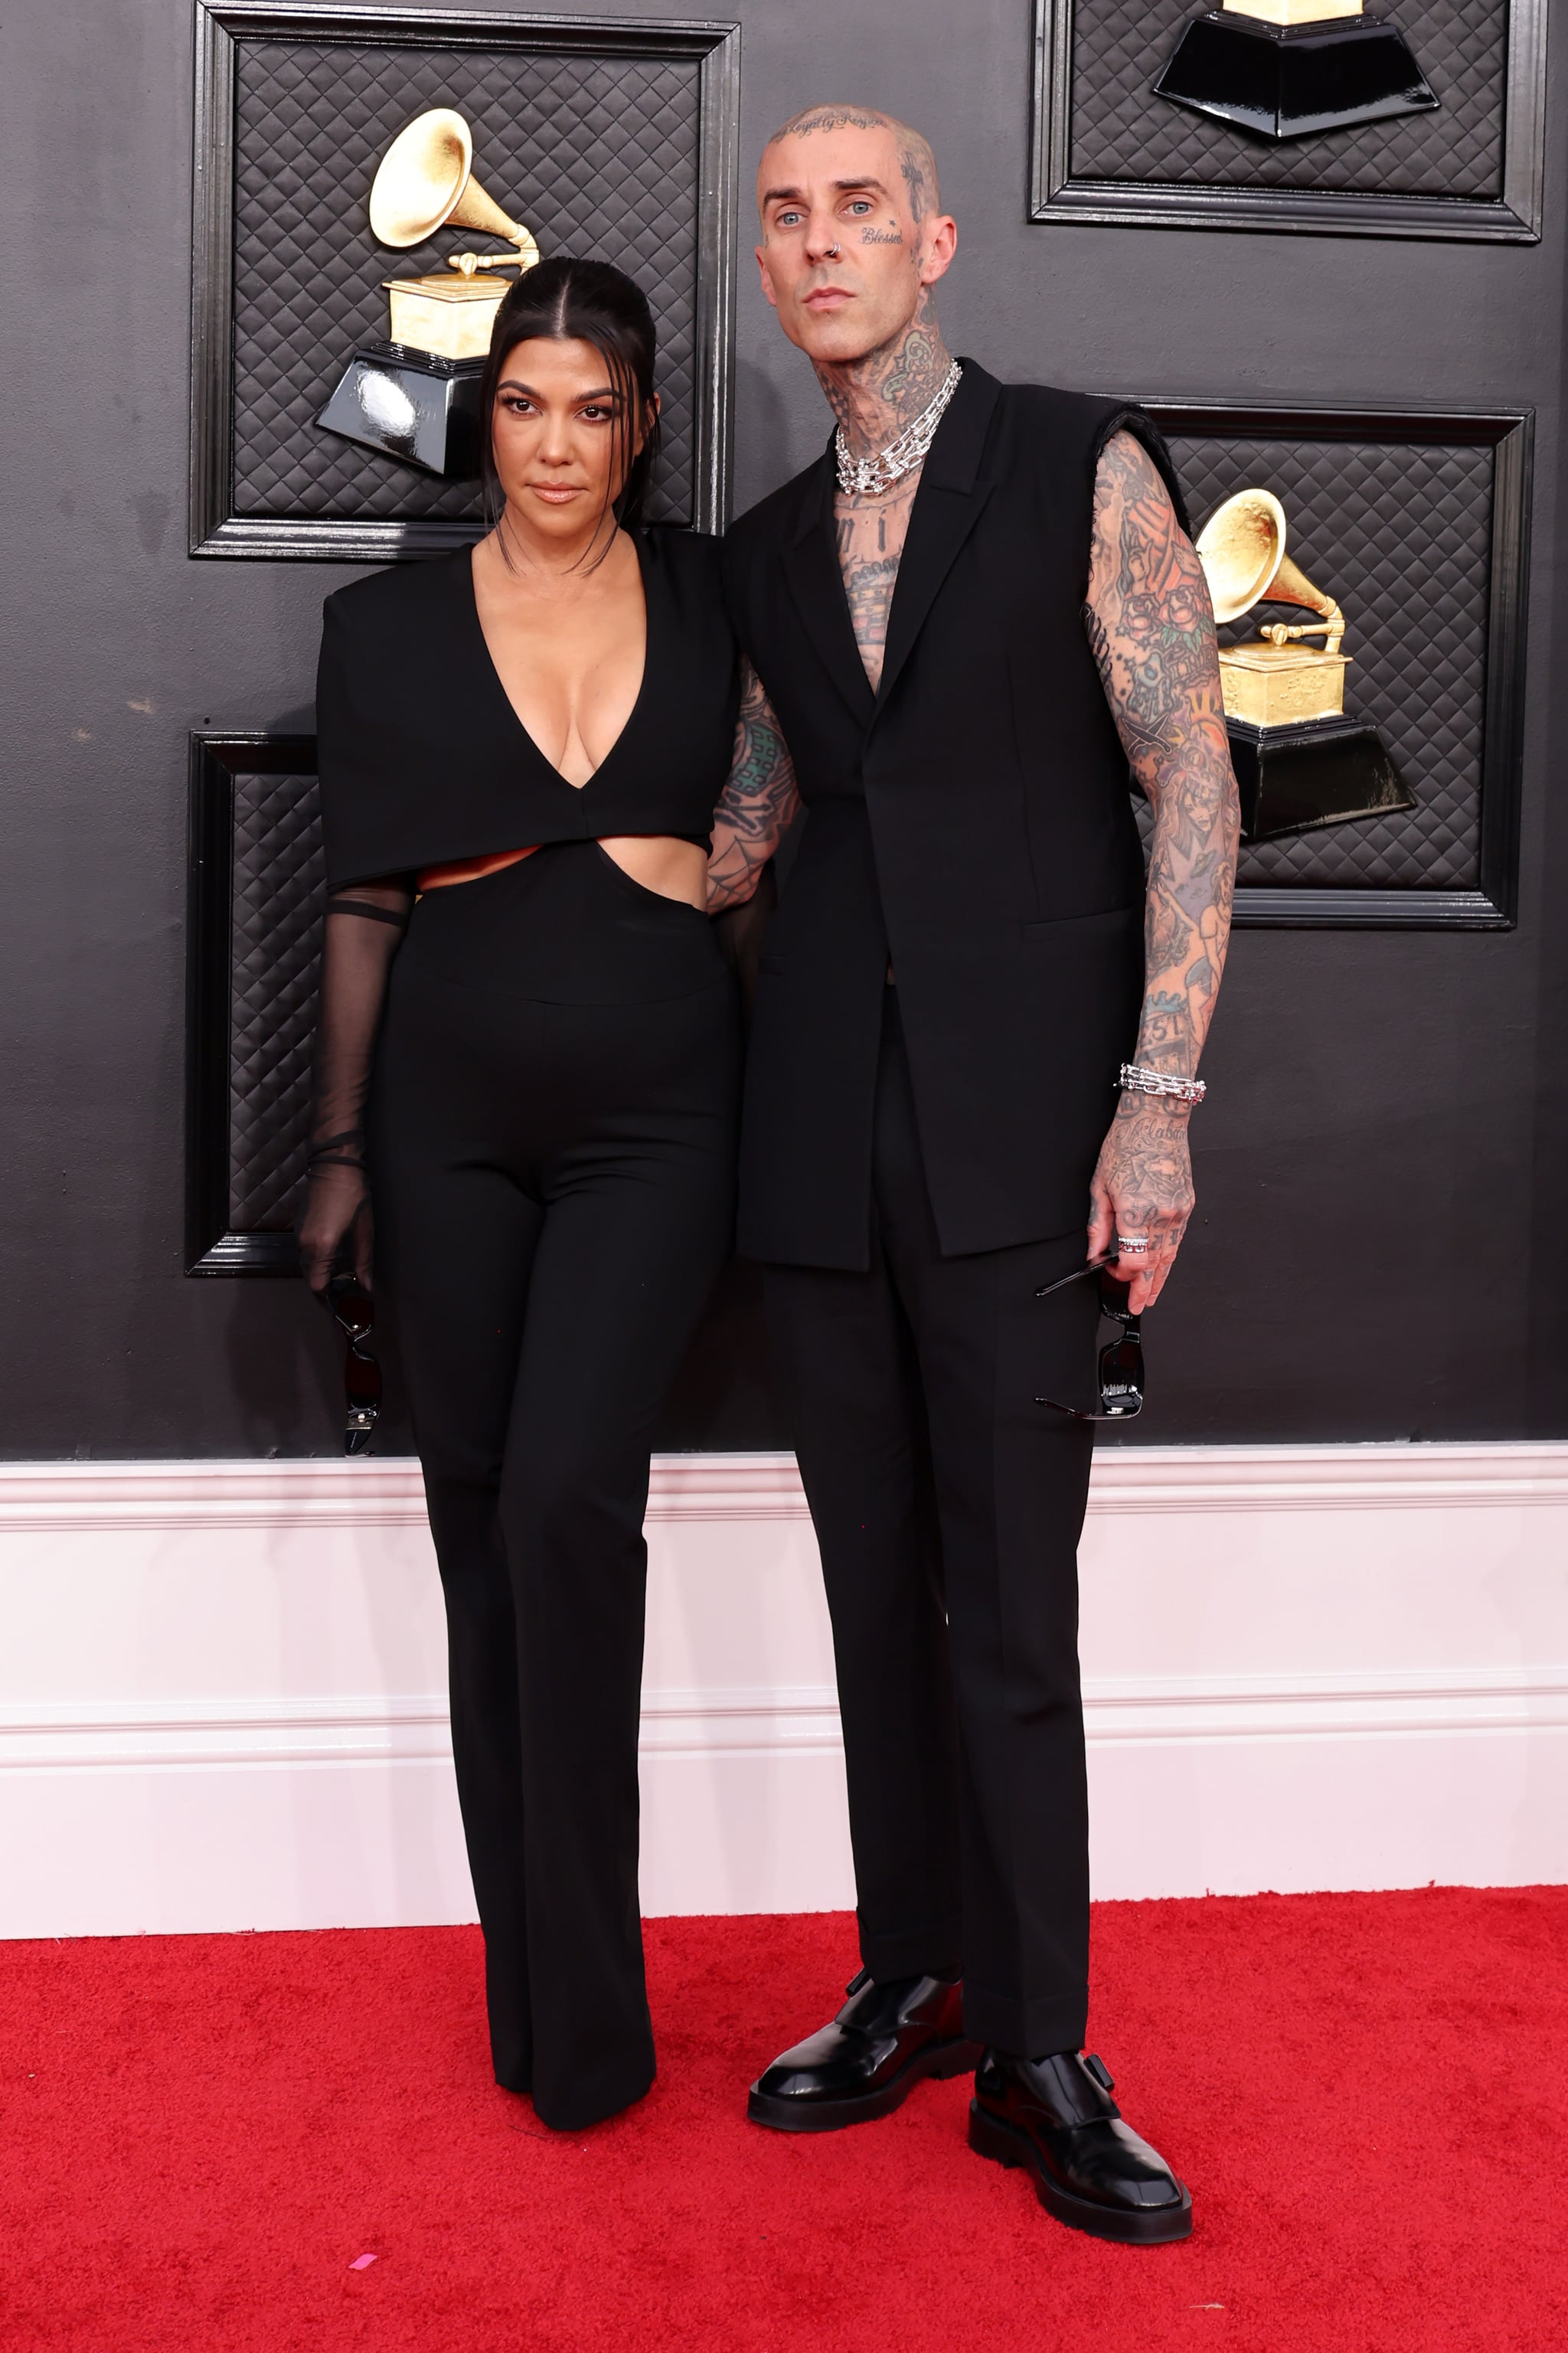 LAS VEGAS, NEVADA - APRIL 03: (L-R) Kourtney Kardashian and Travis Barker attend the 64th Annual GRAMMY Awards at MGM Grand Garden Arena on April 03, 2022 in Las Vegas, Nevada. (Photo by Amy Sussman/Getty Images)